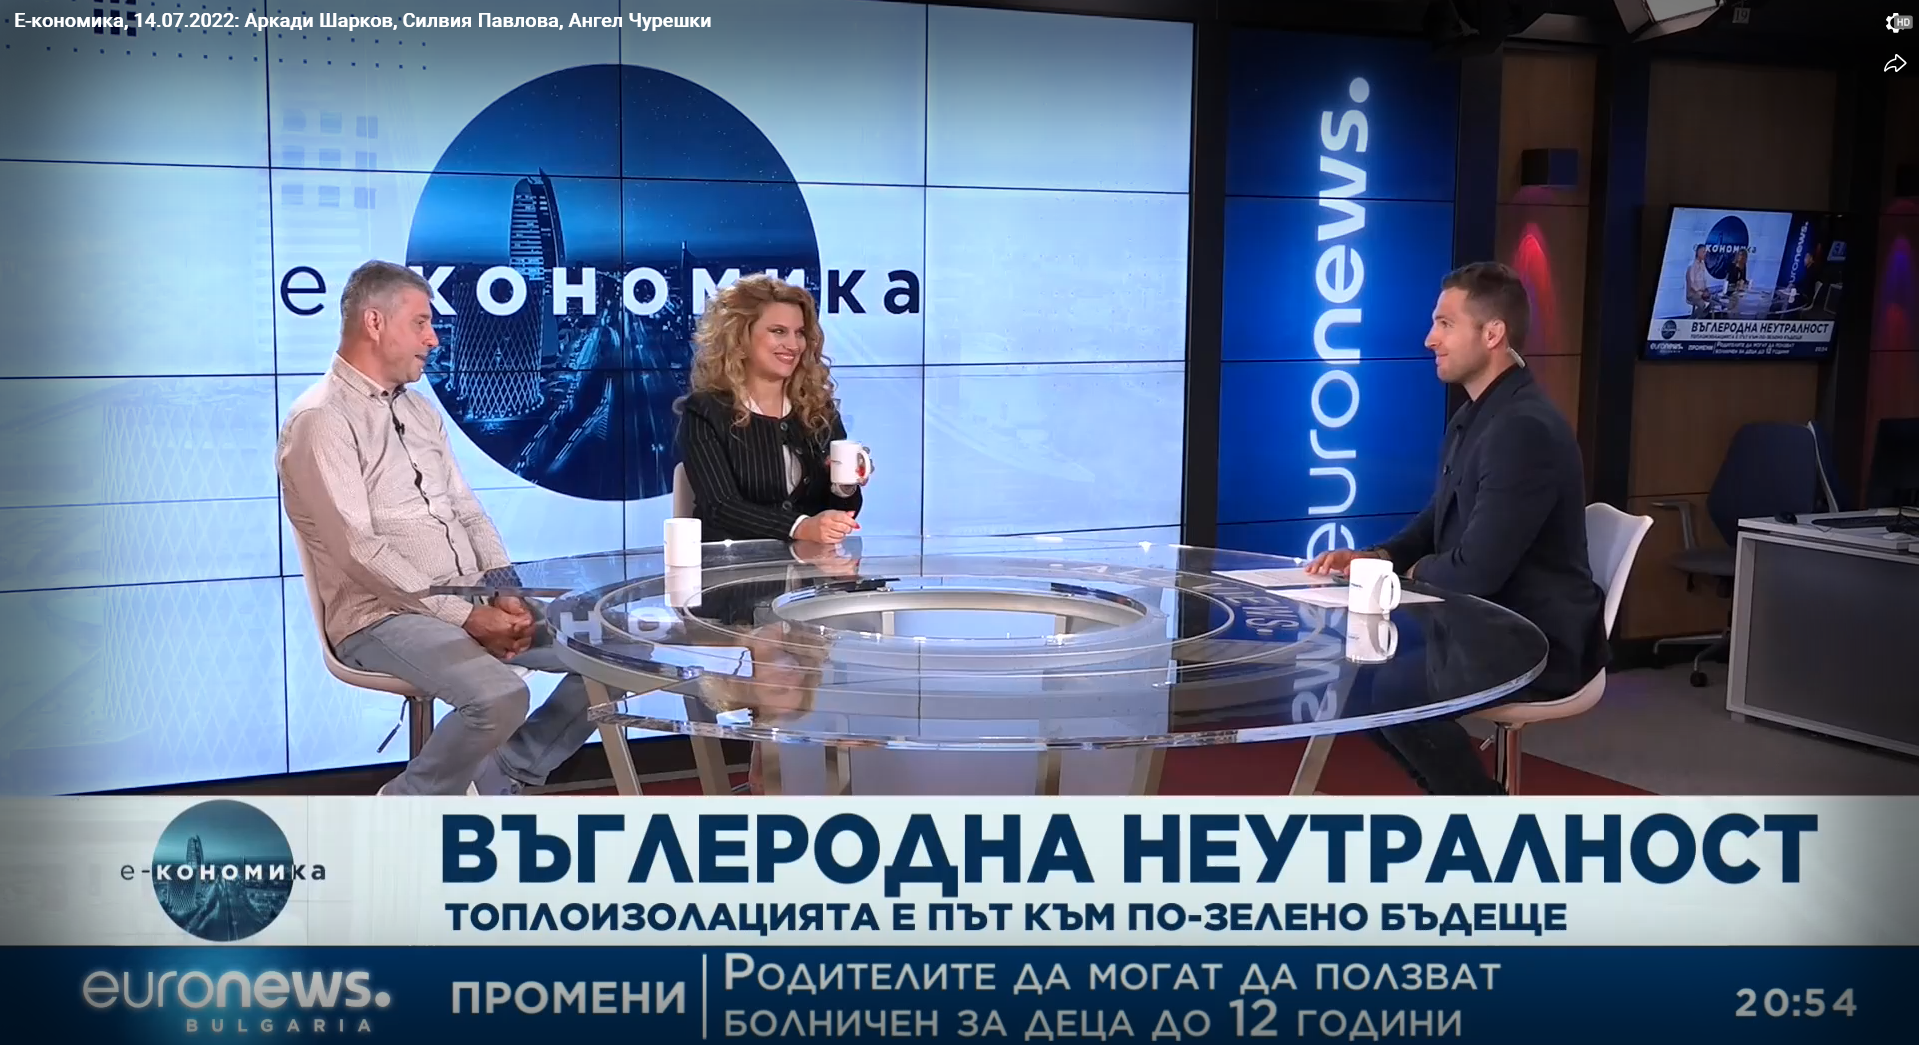 Euronews Interview on 14 July 2022 with PropTech Bulgaria & MakeiS